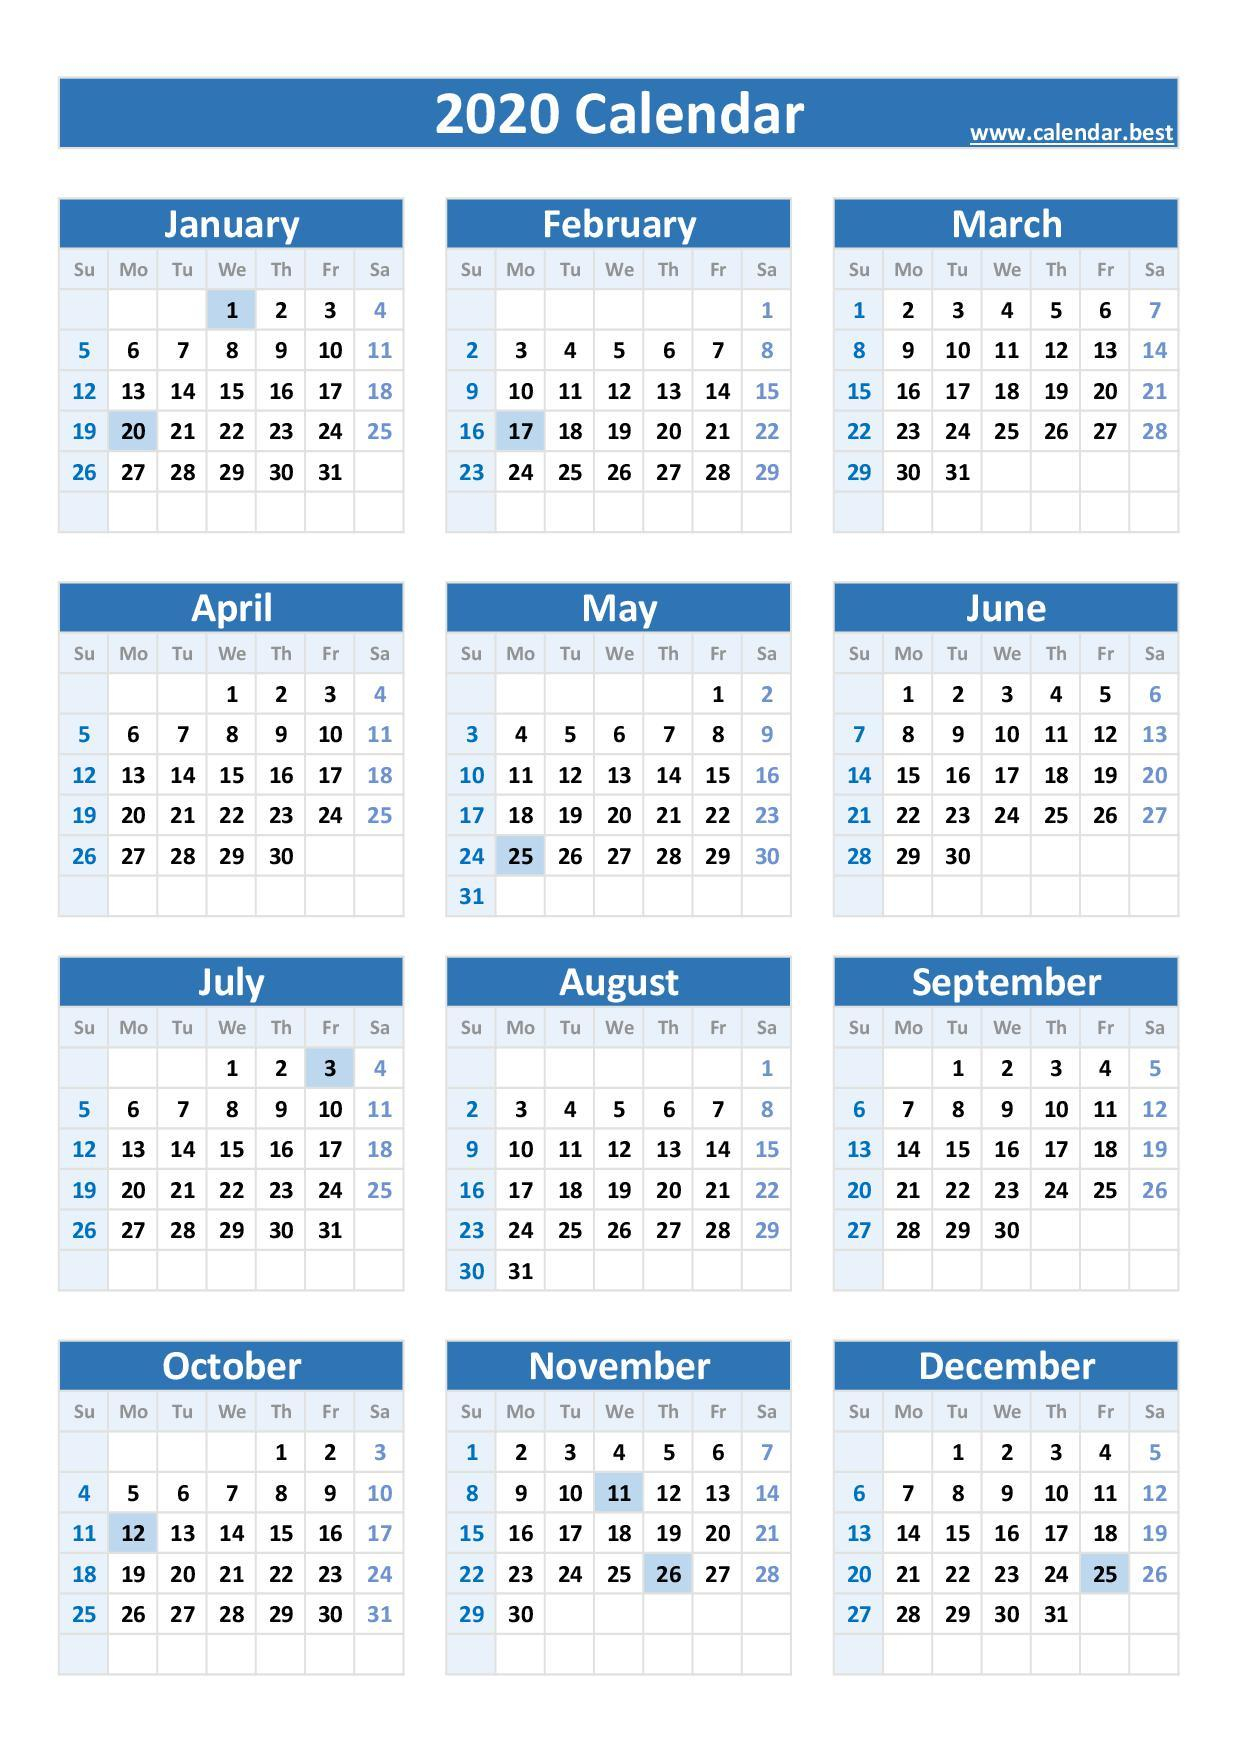 2020, 2021, 2022, 2023 Federal Holidays : List And